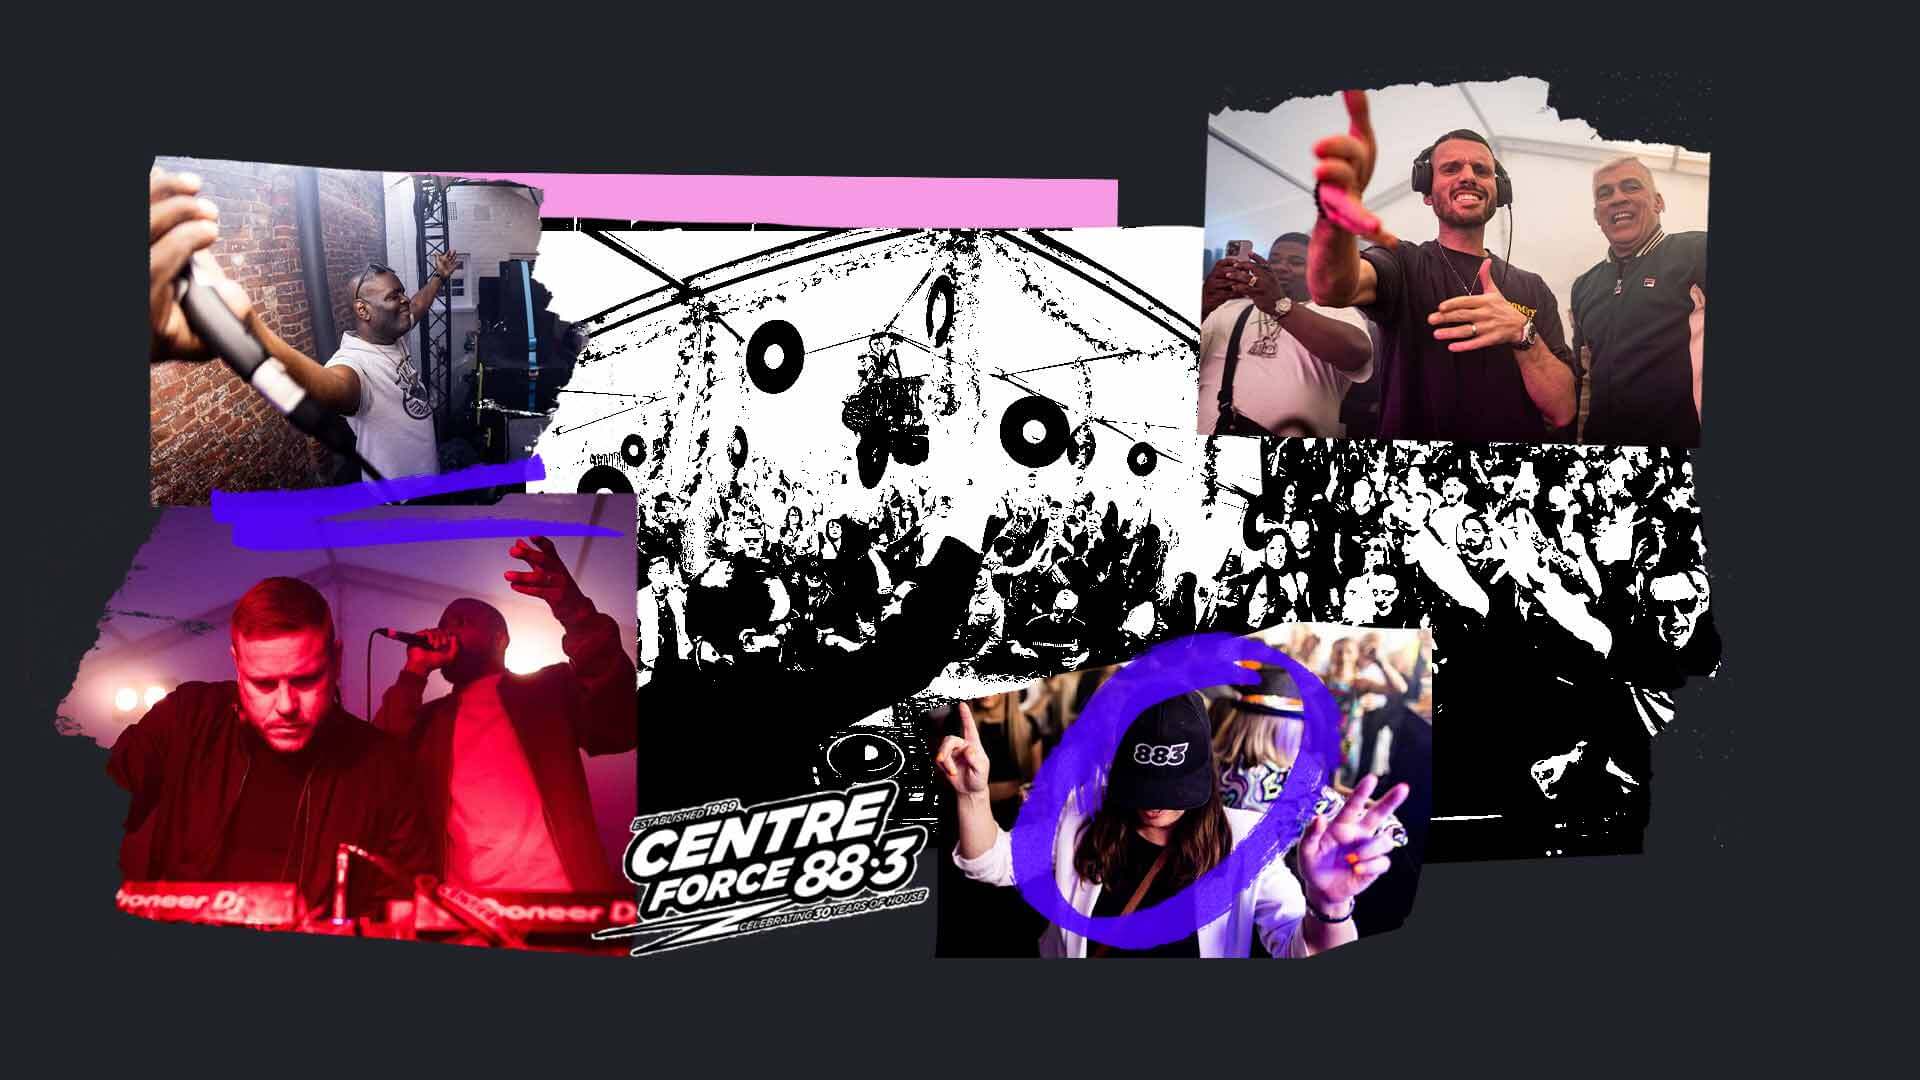 Centreforce Is The Dance Music Radio Station That Gives Back